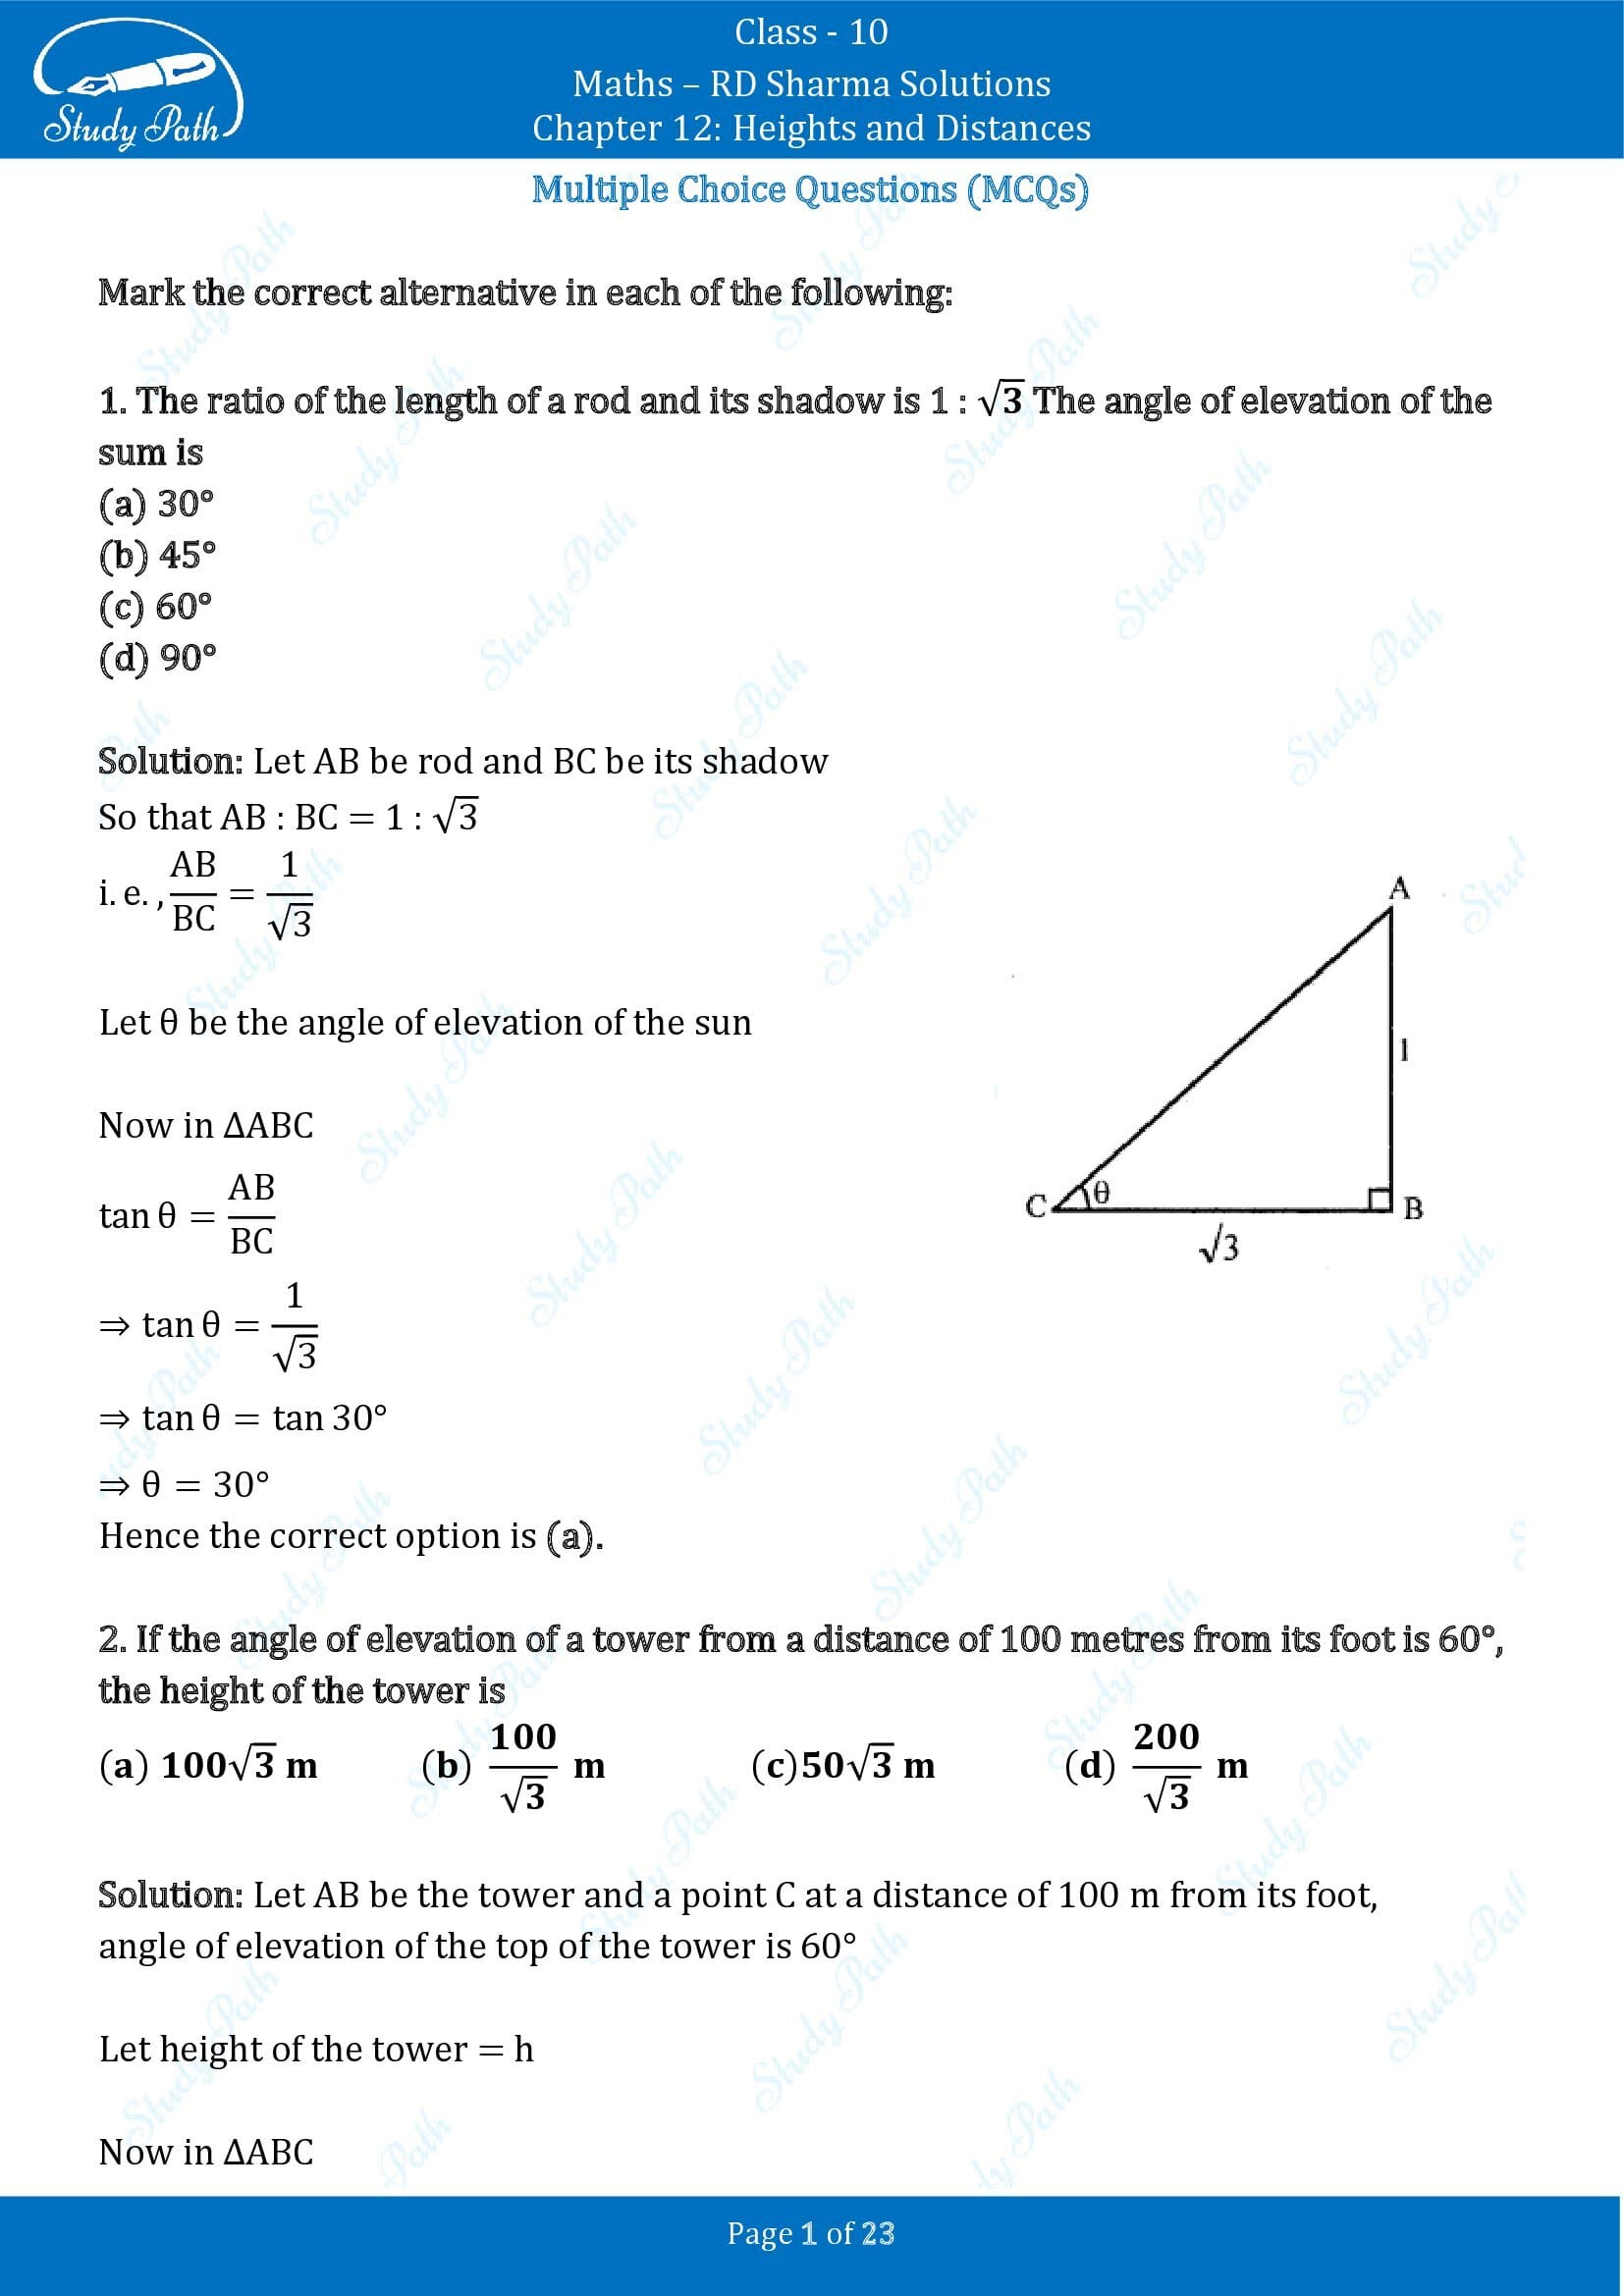 RD Sharma Solutions Class 10 Chapter 12 Heights and Distances Multiple Choice Question MCQs 00001